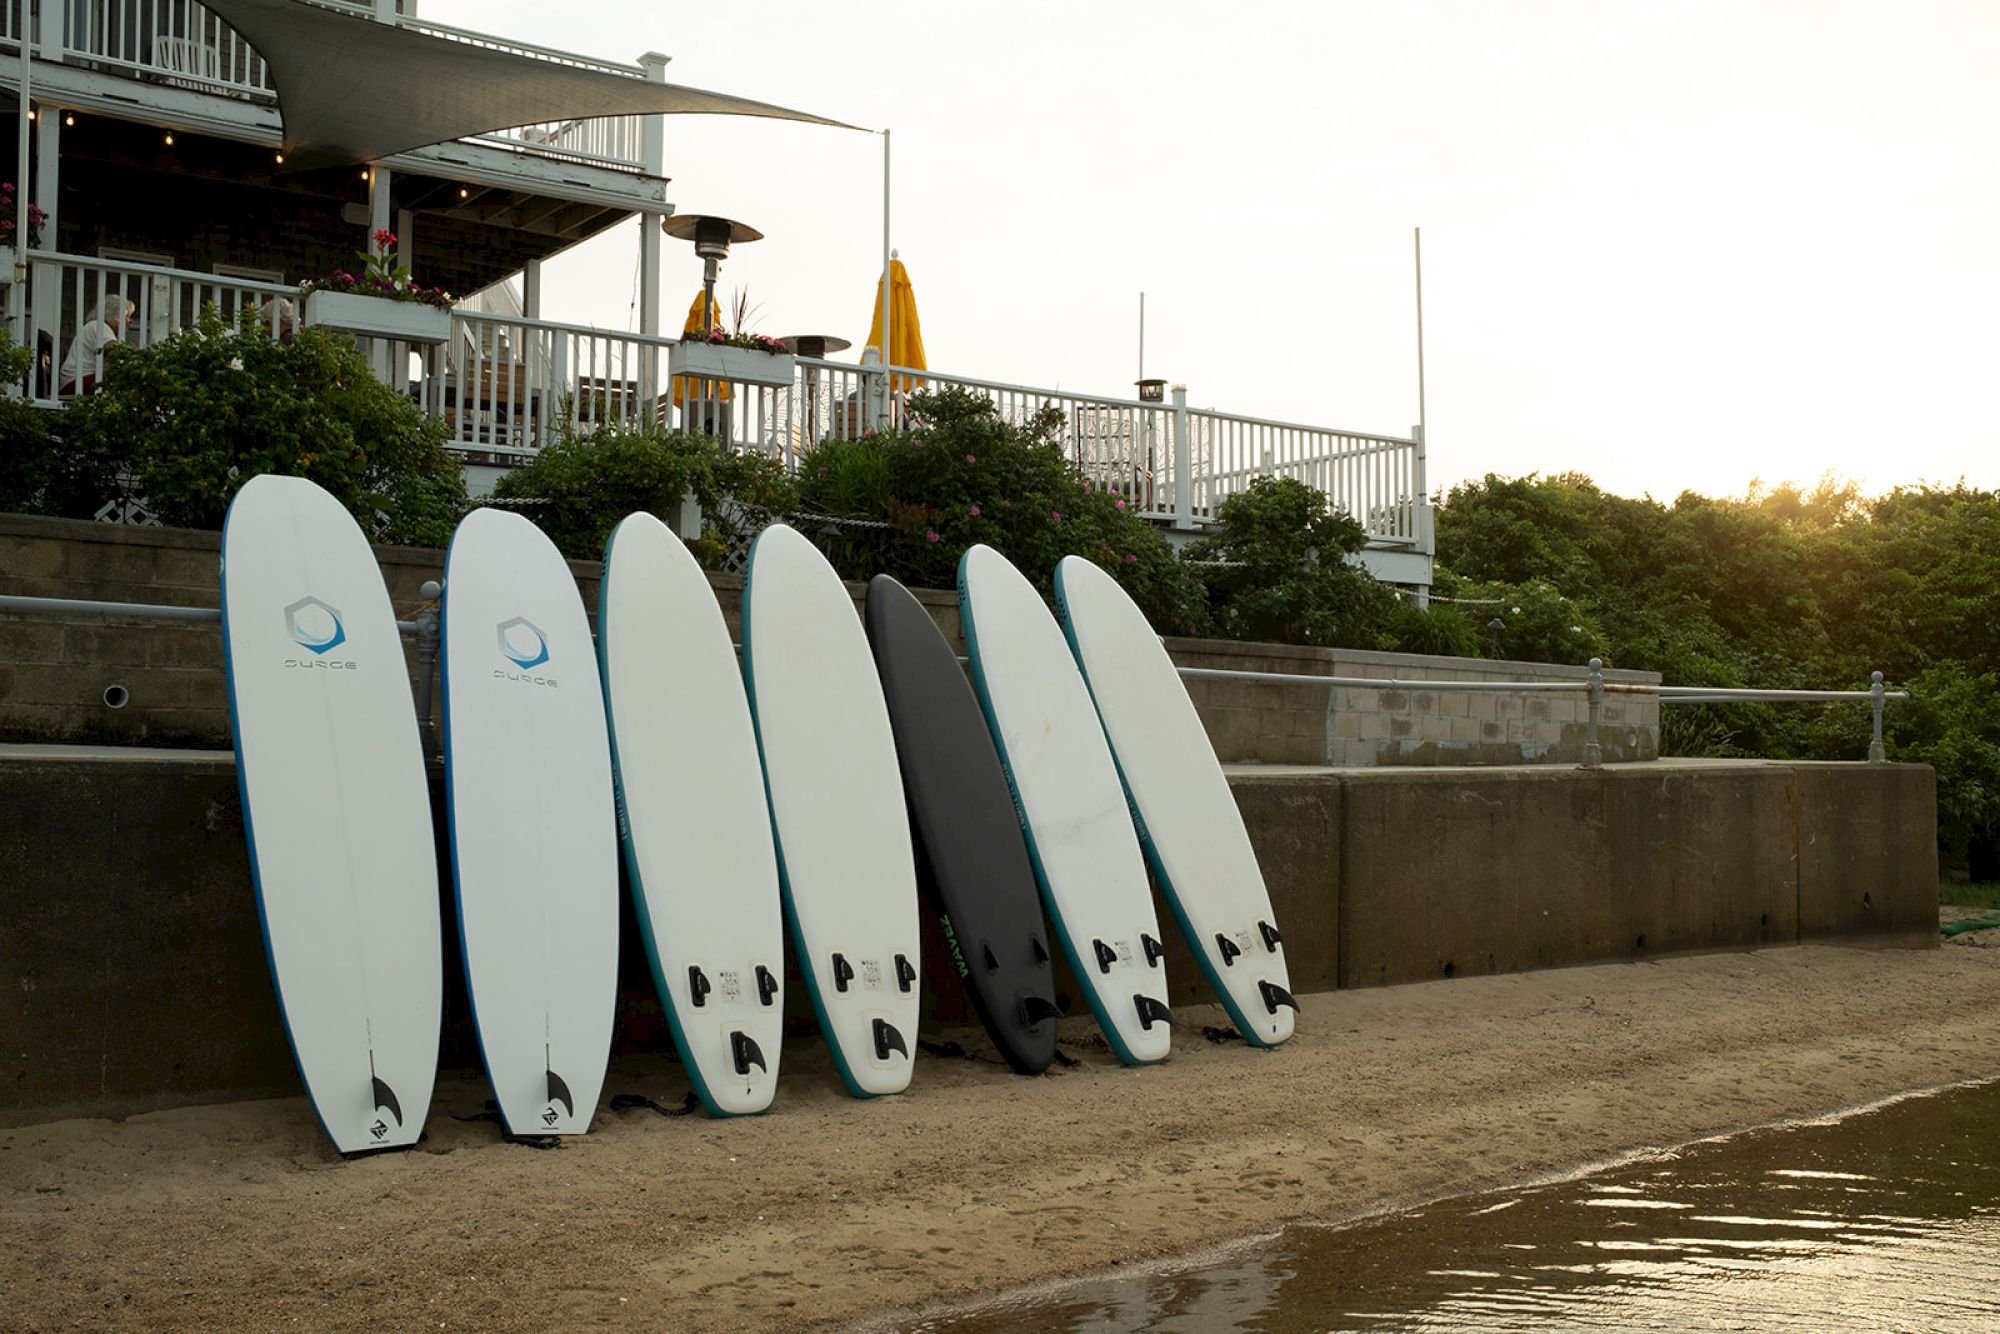 Several surfboards are lined up on a sandy shore near water, with a building and greenery in the background.